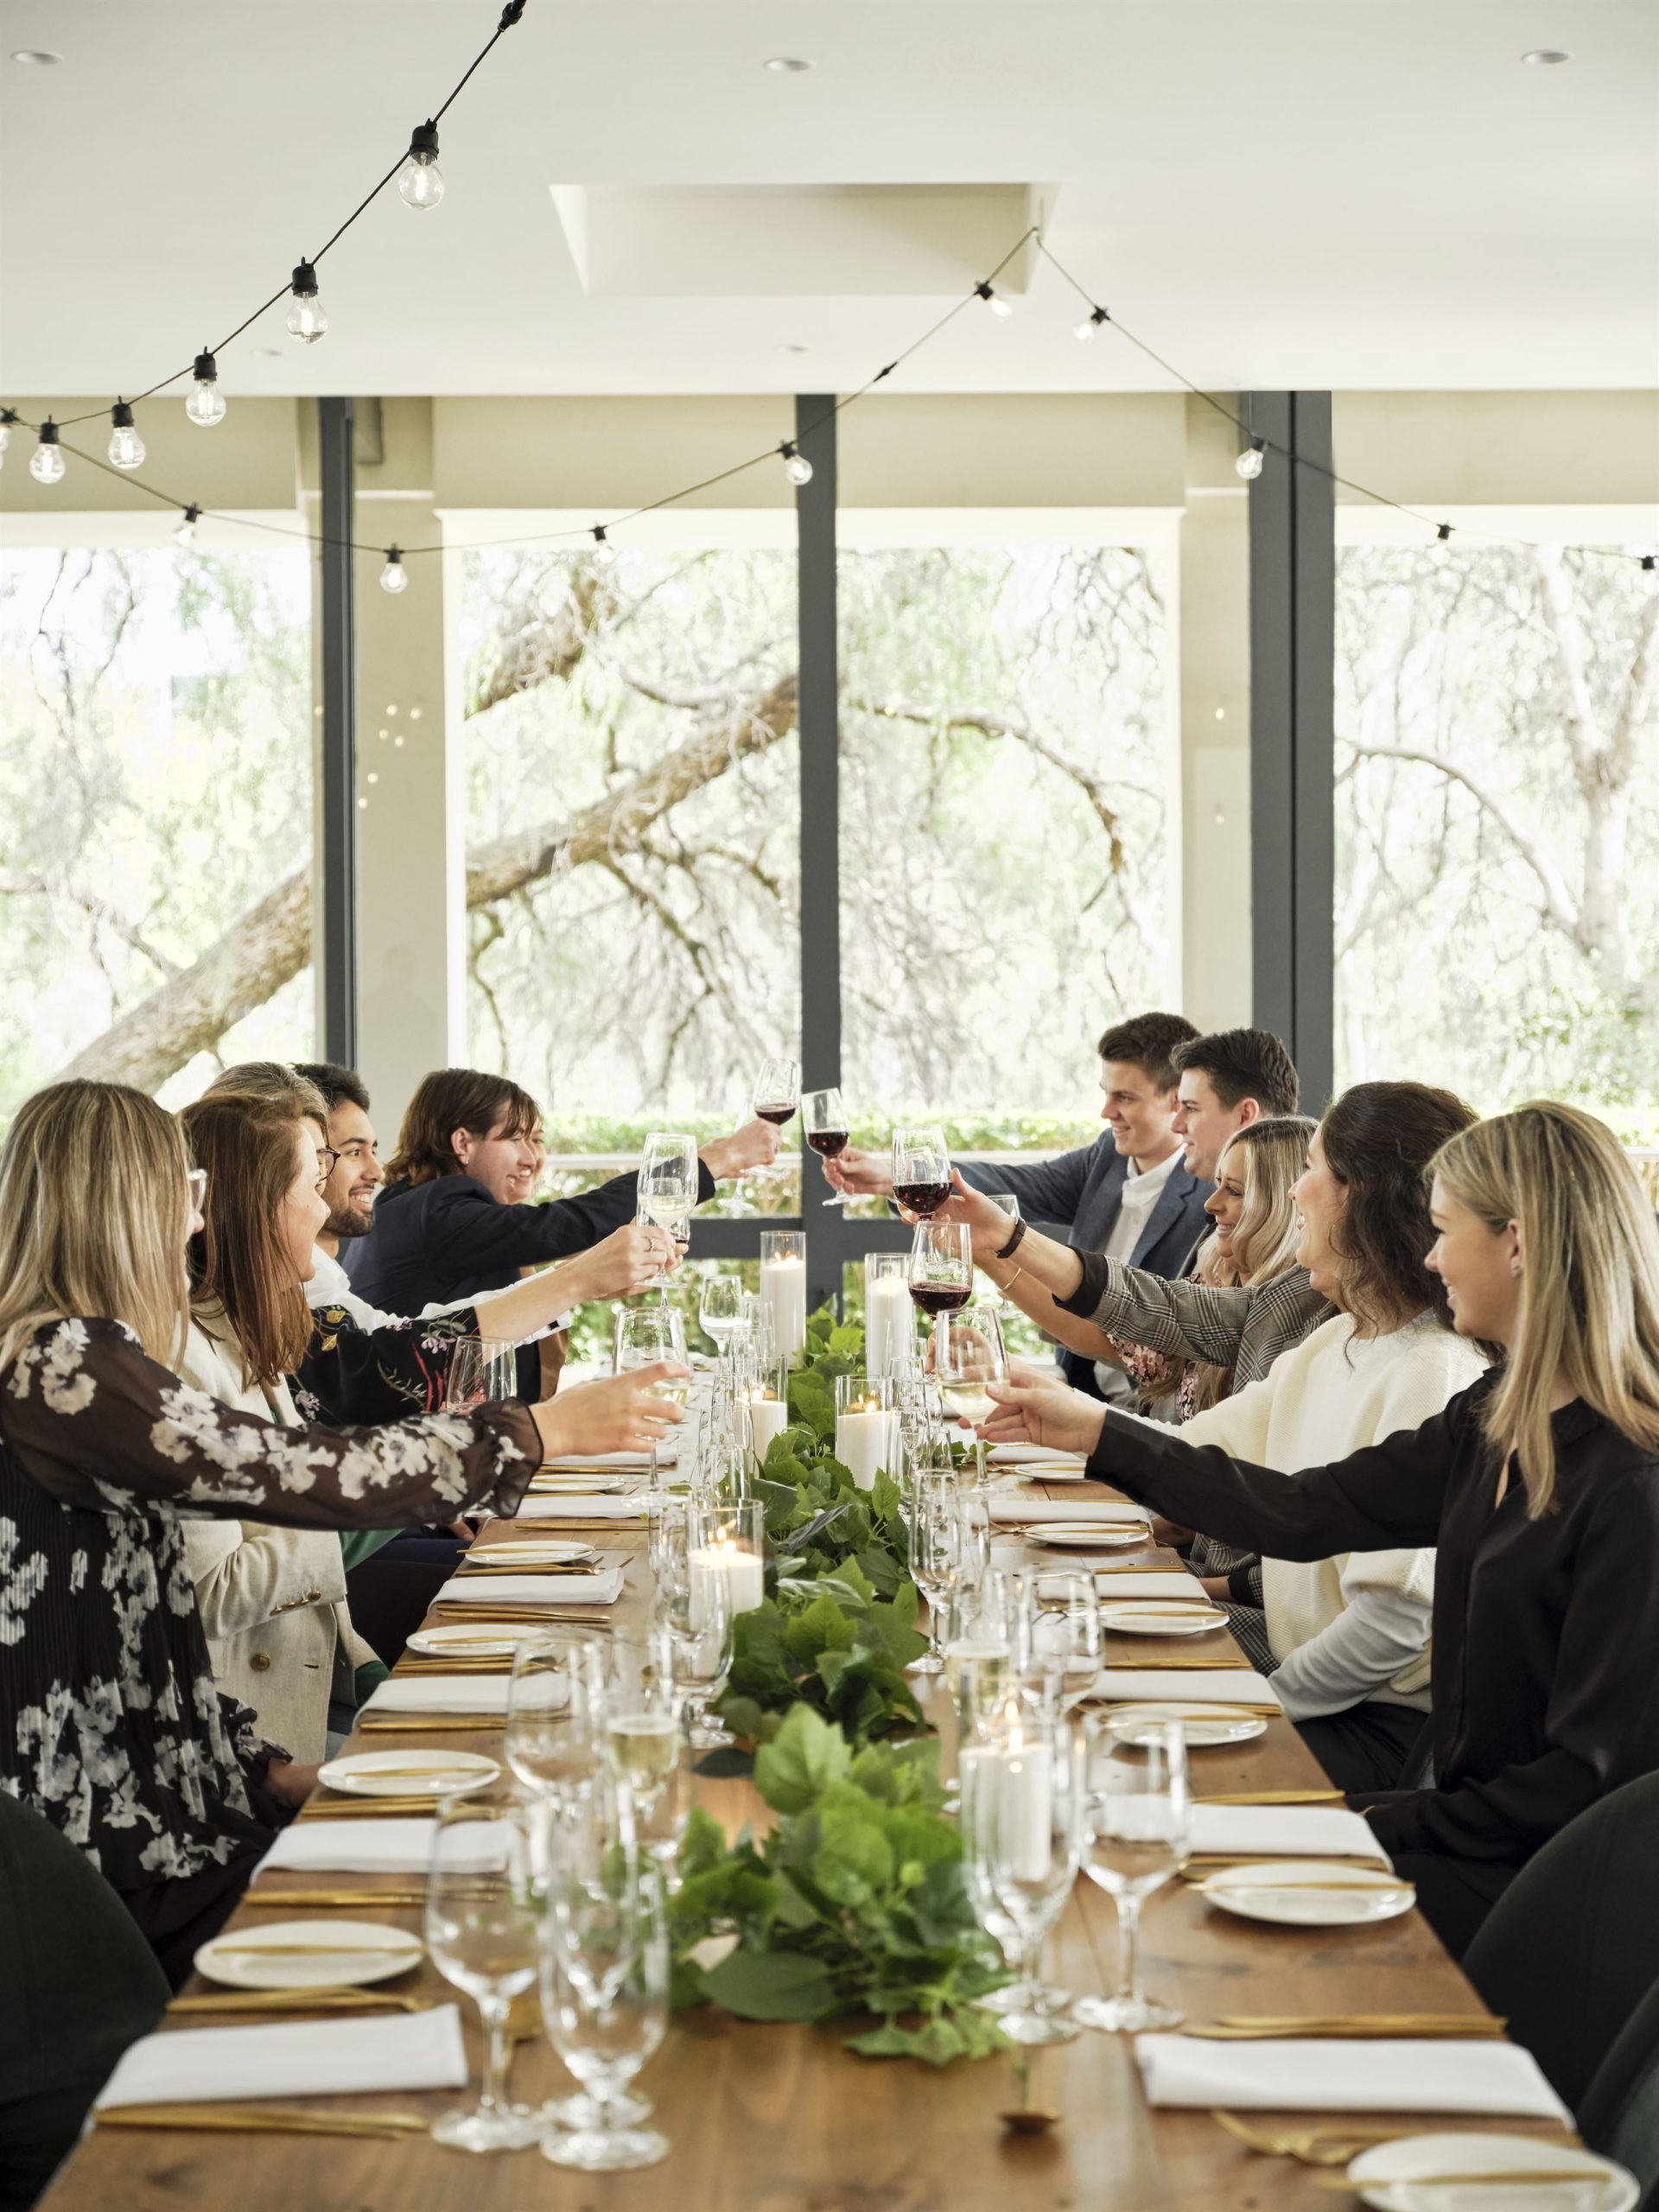 Festive gathering at a Melbourne venue for Christmas parties.